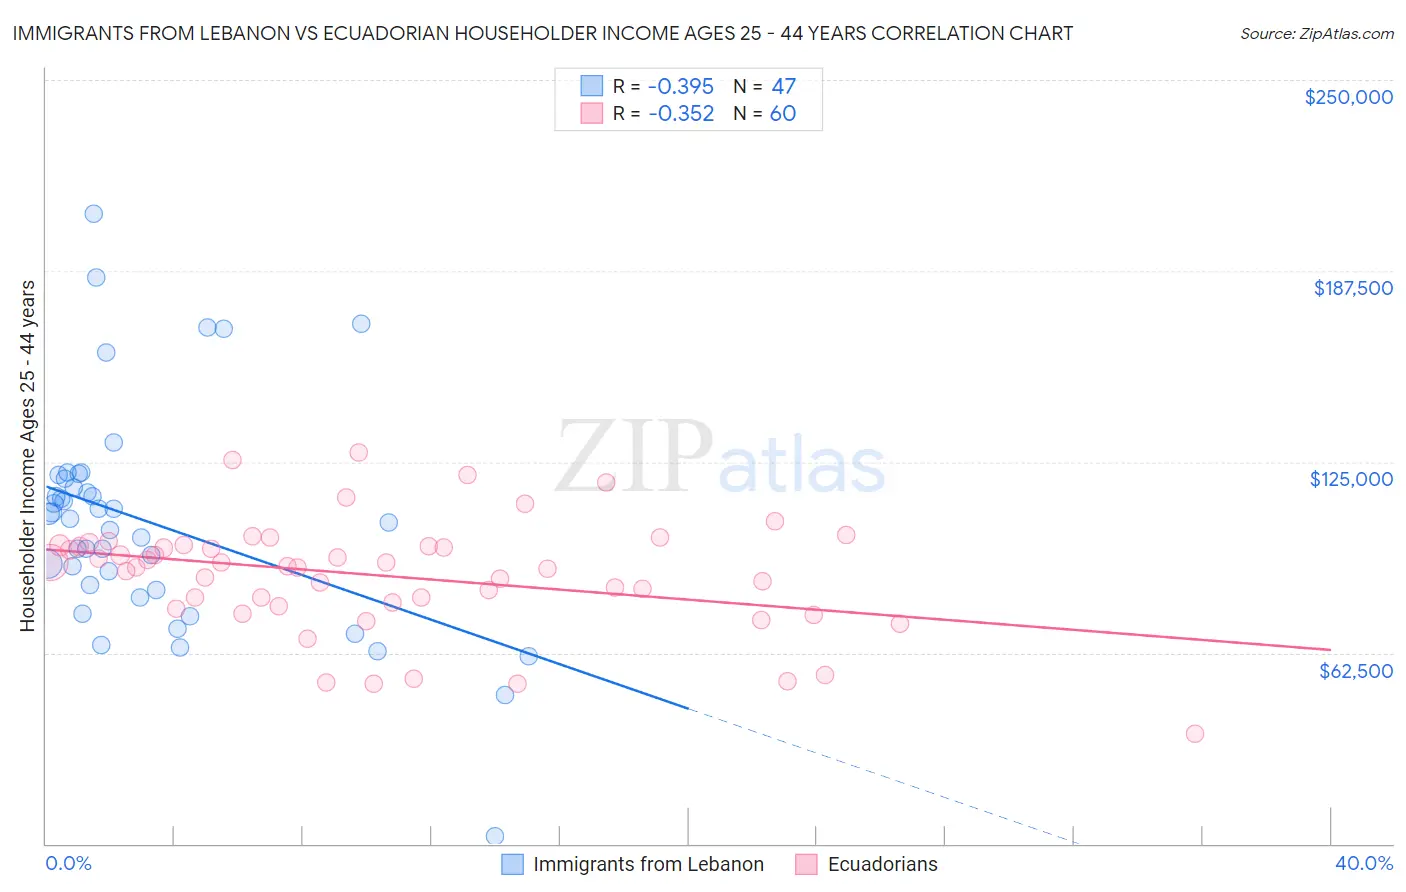 Immigrants from Lebanon vs Ecuadorian Householder Income Ages 25 - 44 years